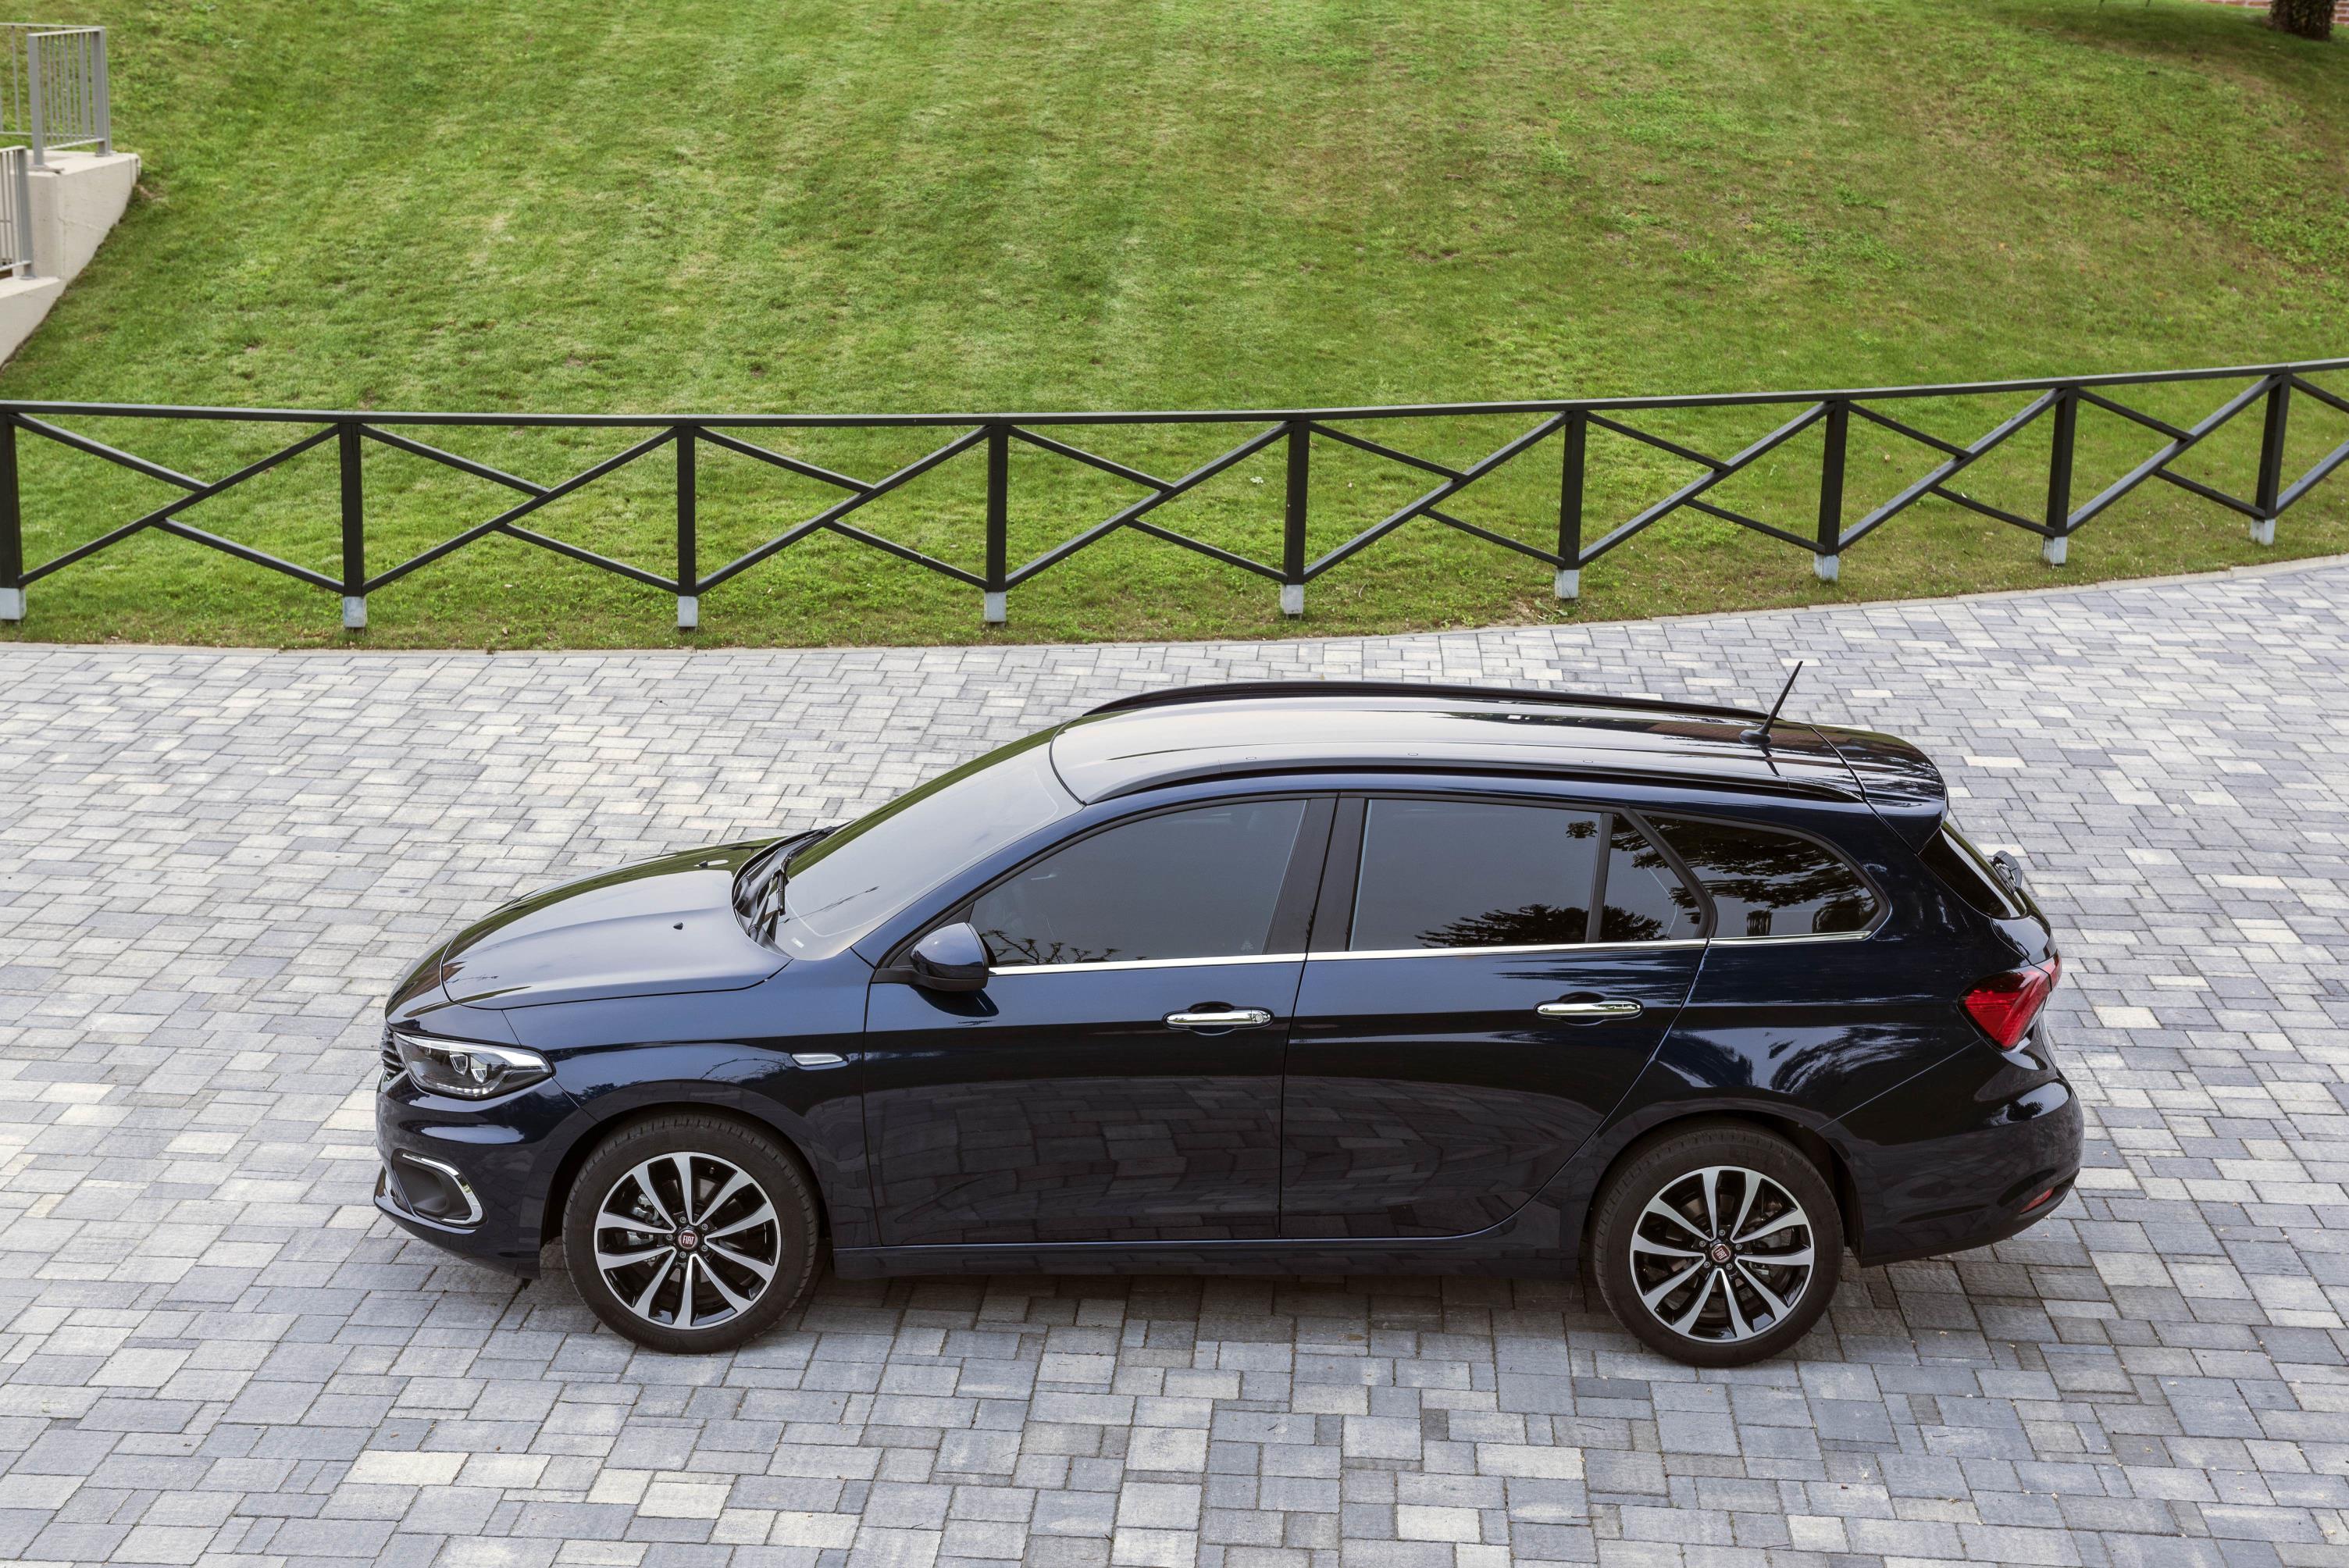 Fiat Tipo Hatchback interior specifications